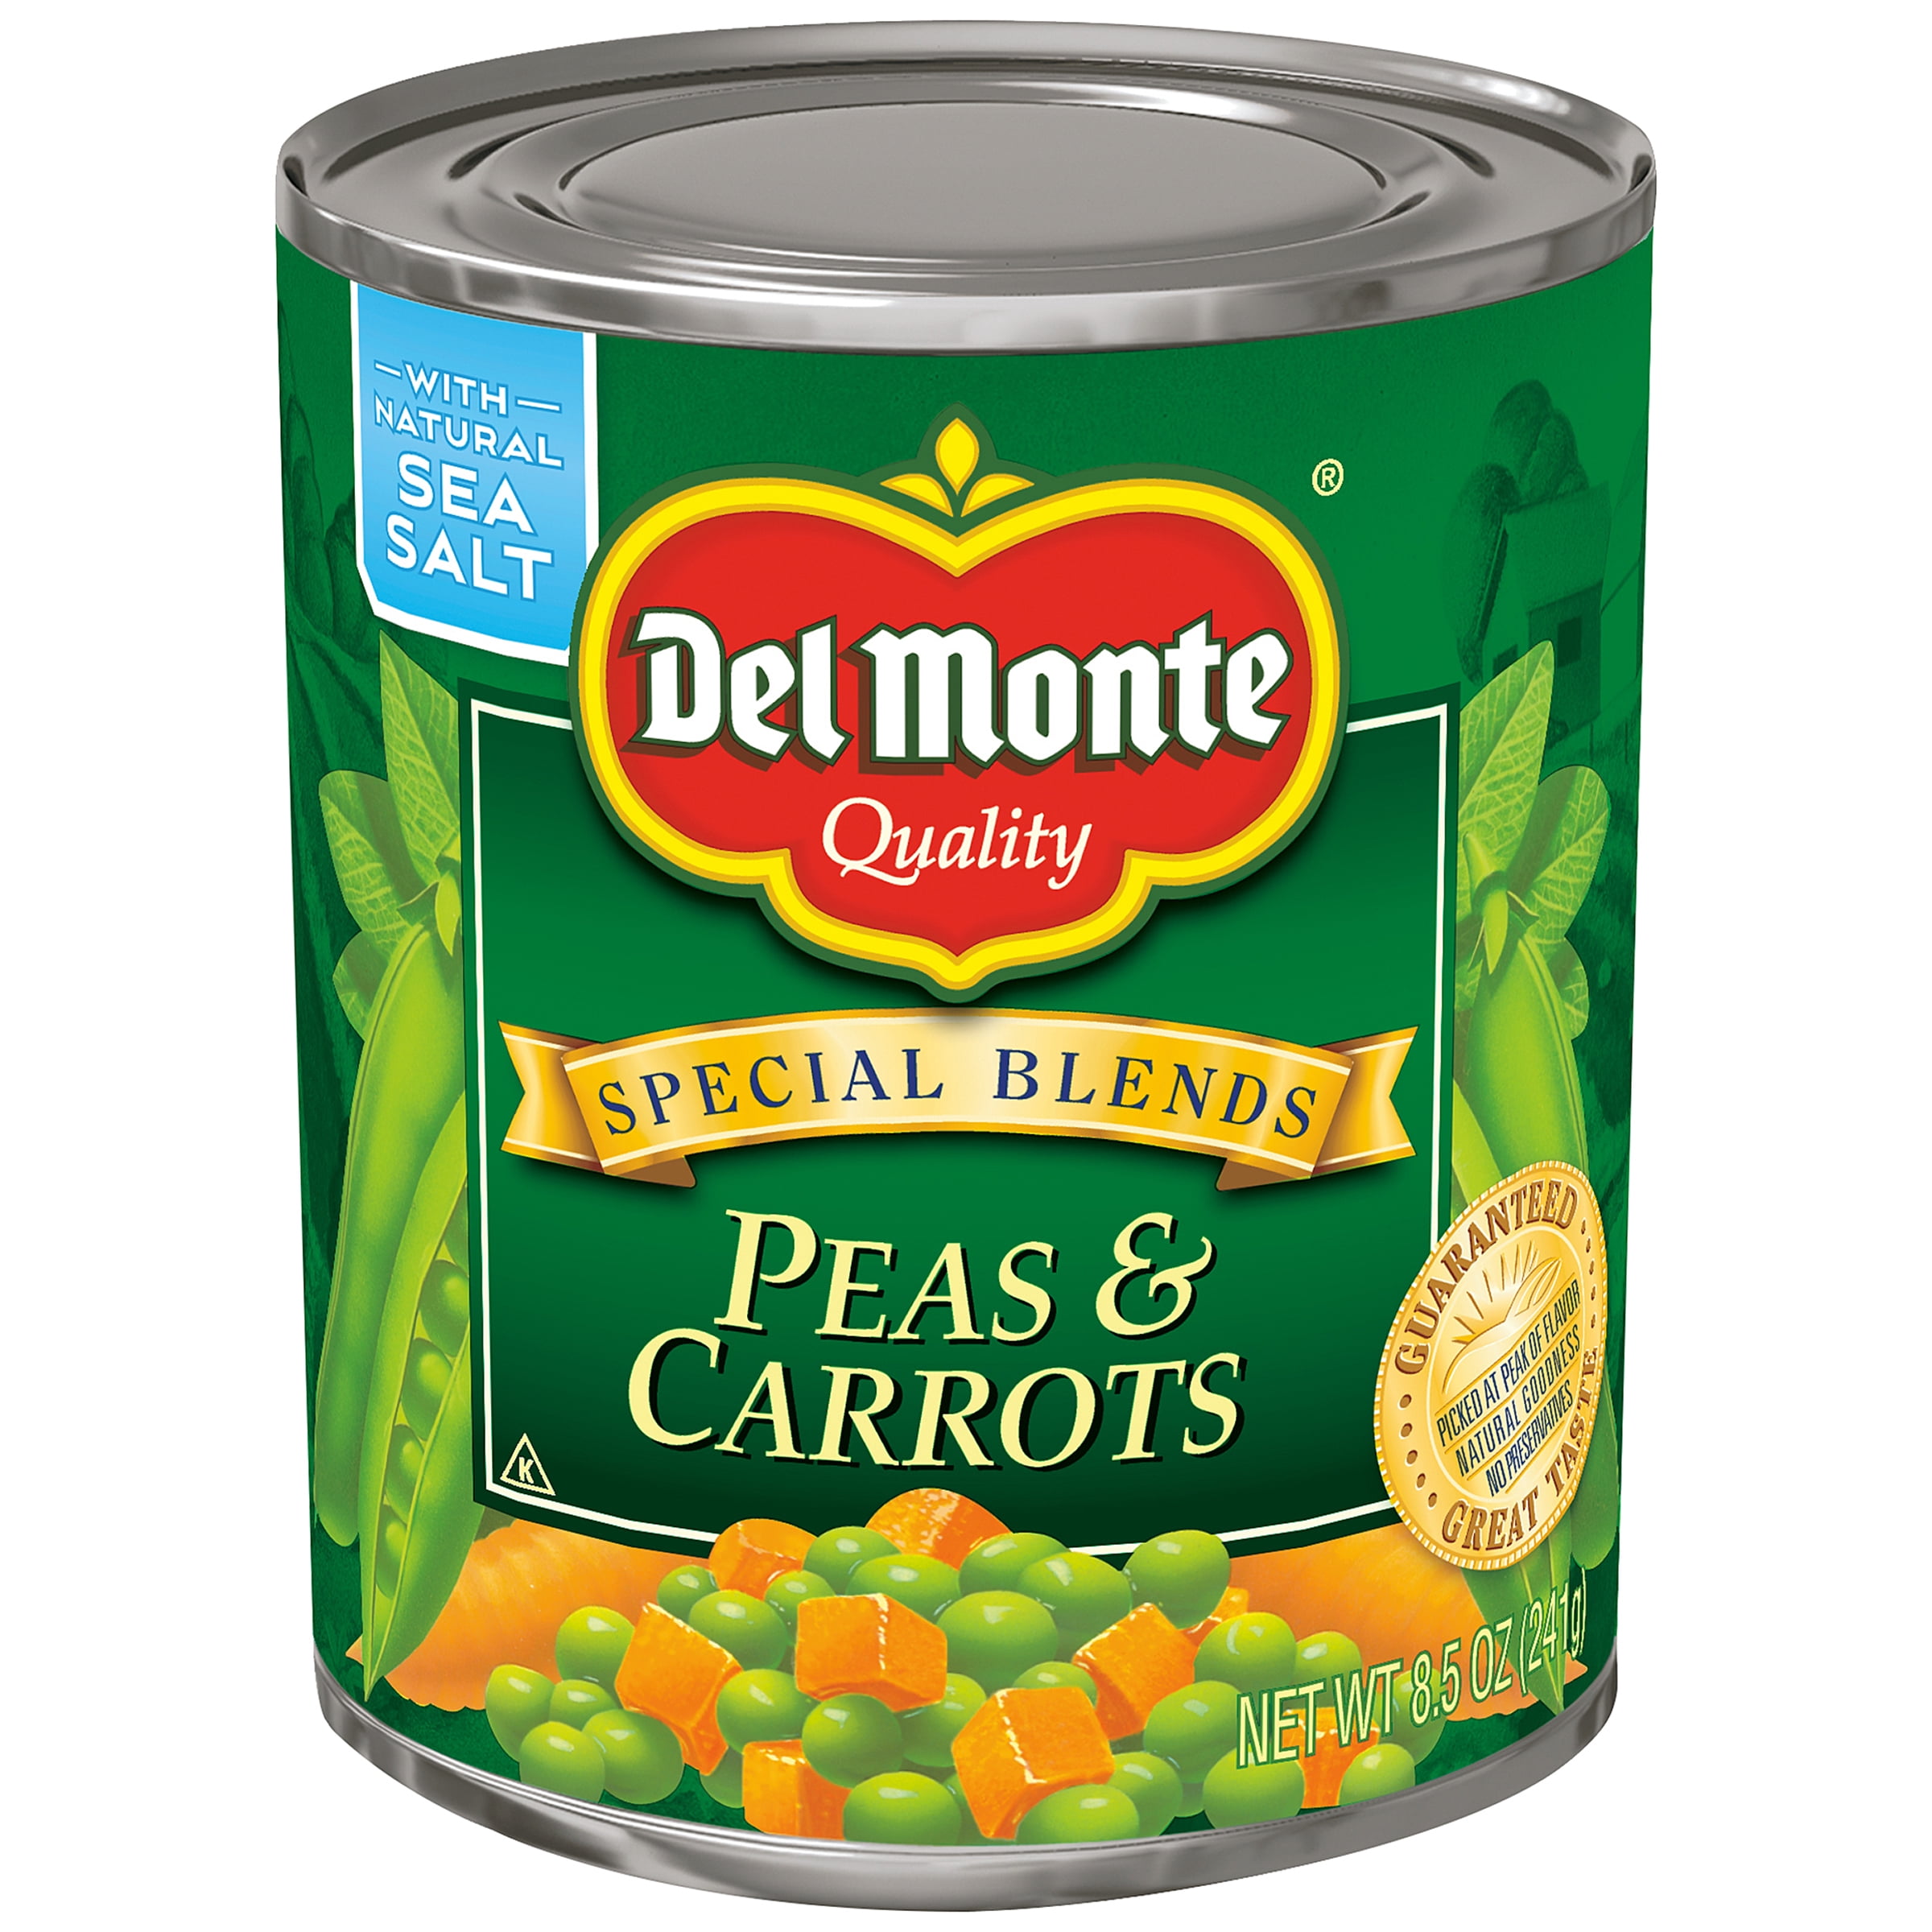 Del Monte Peas & Carrots, Canned Vegetables, 8.5 oz Can